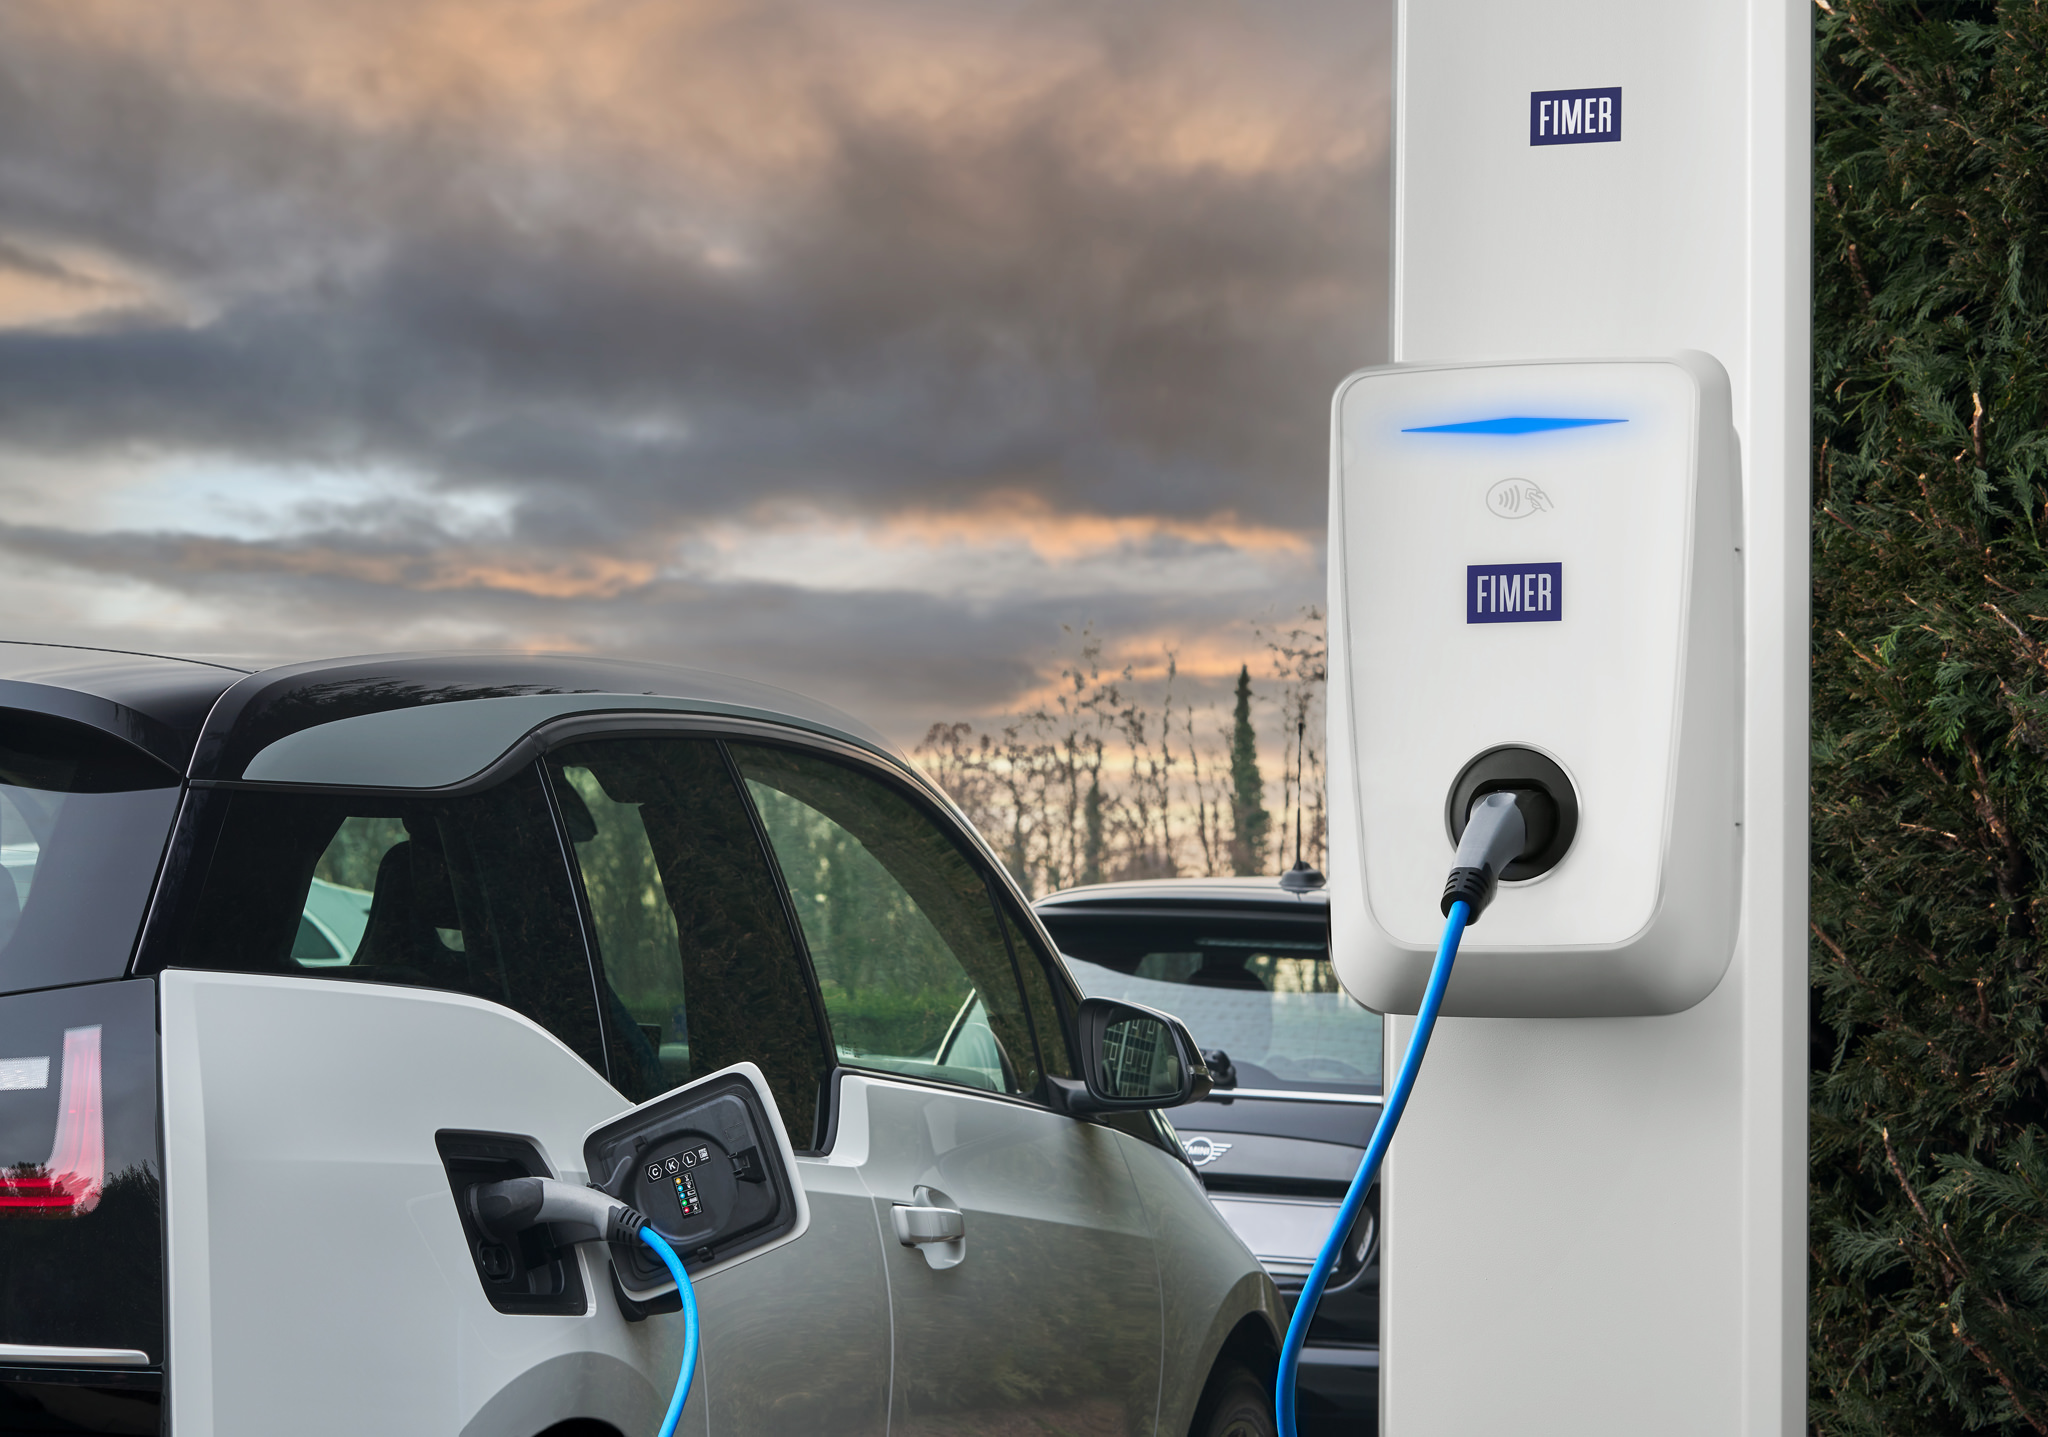 EV charger at home